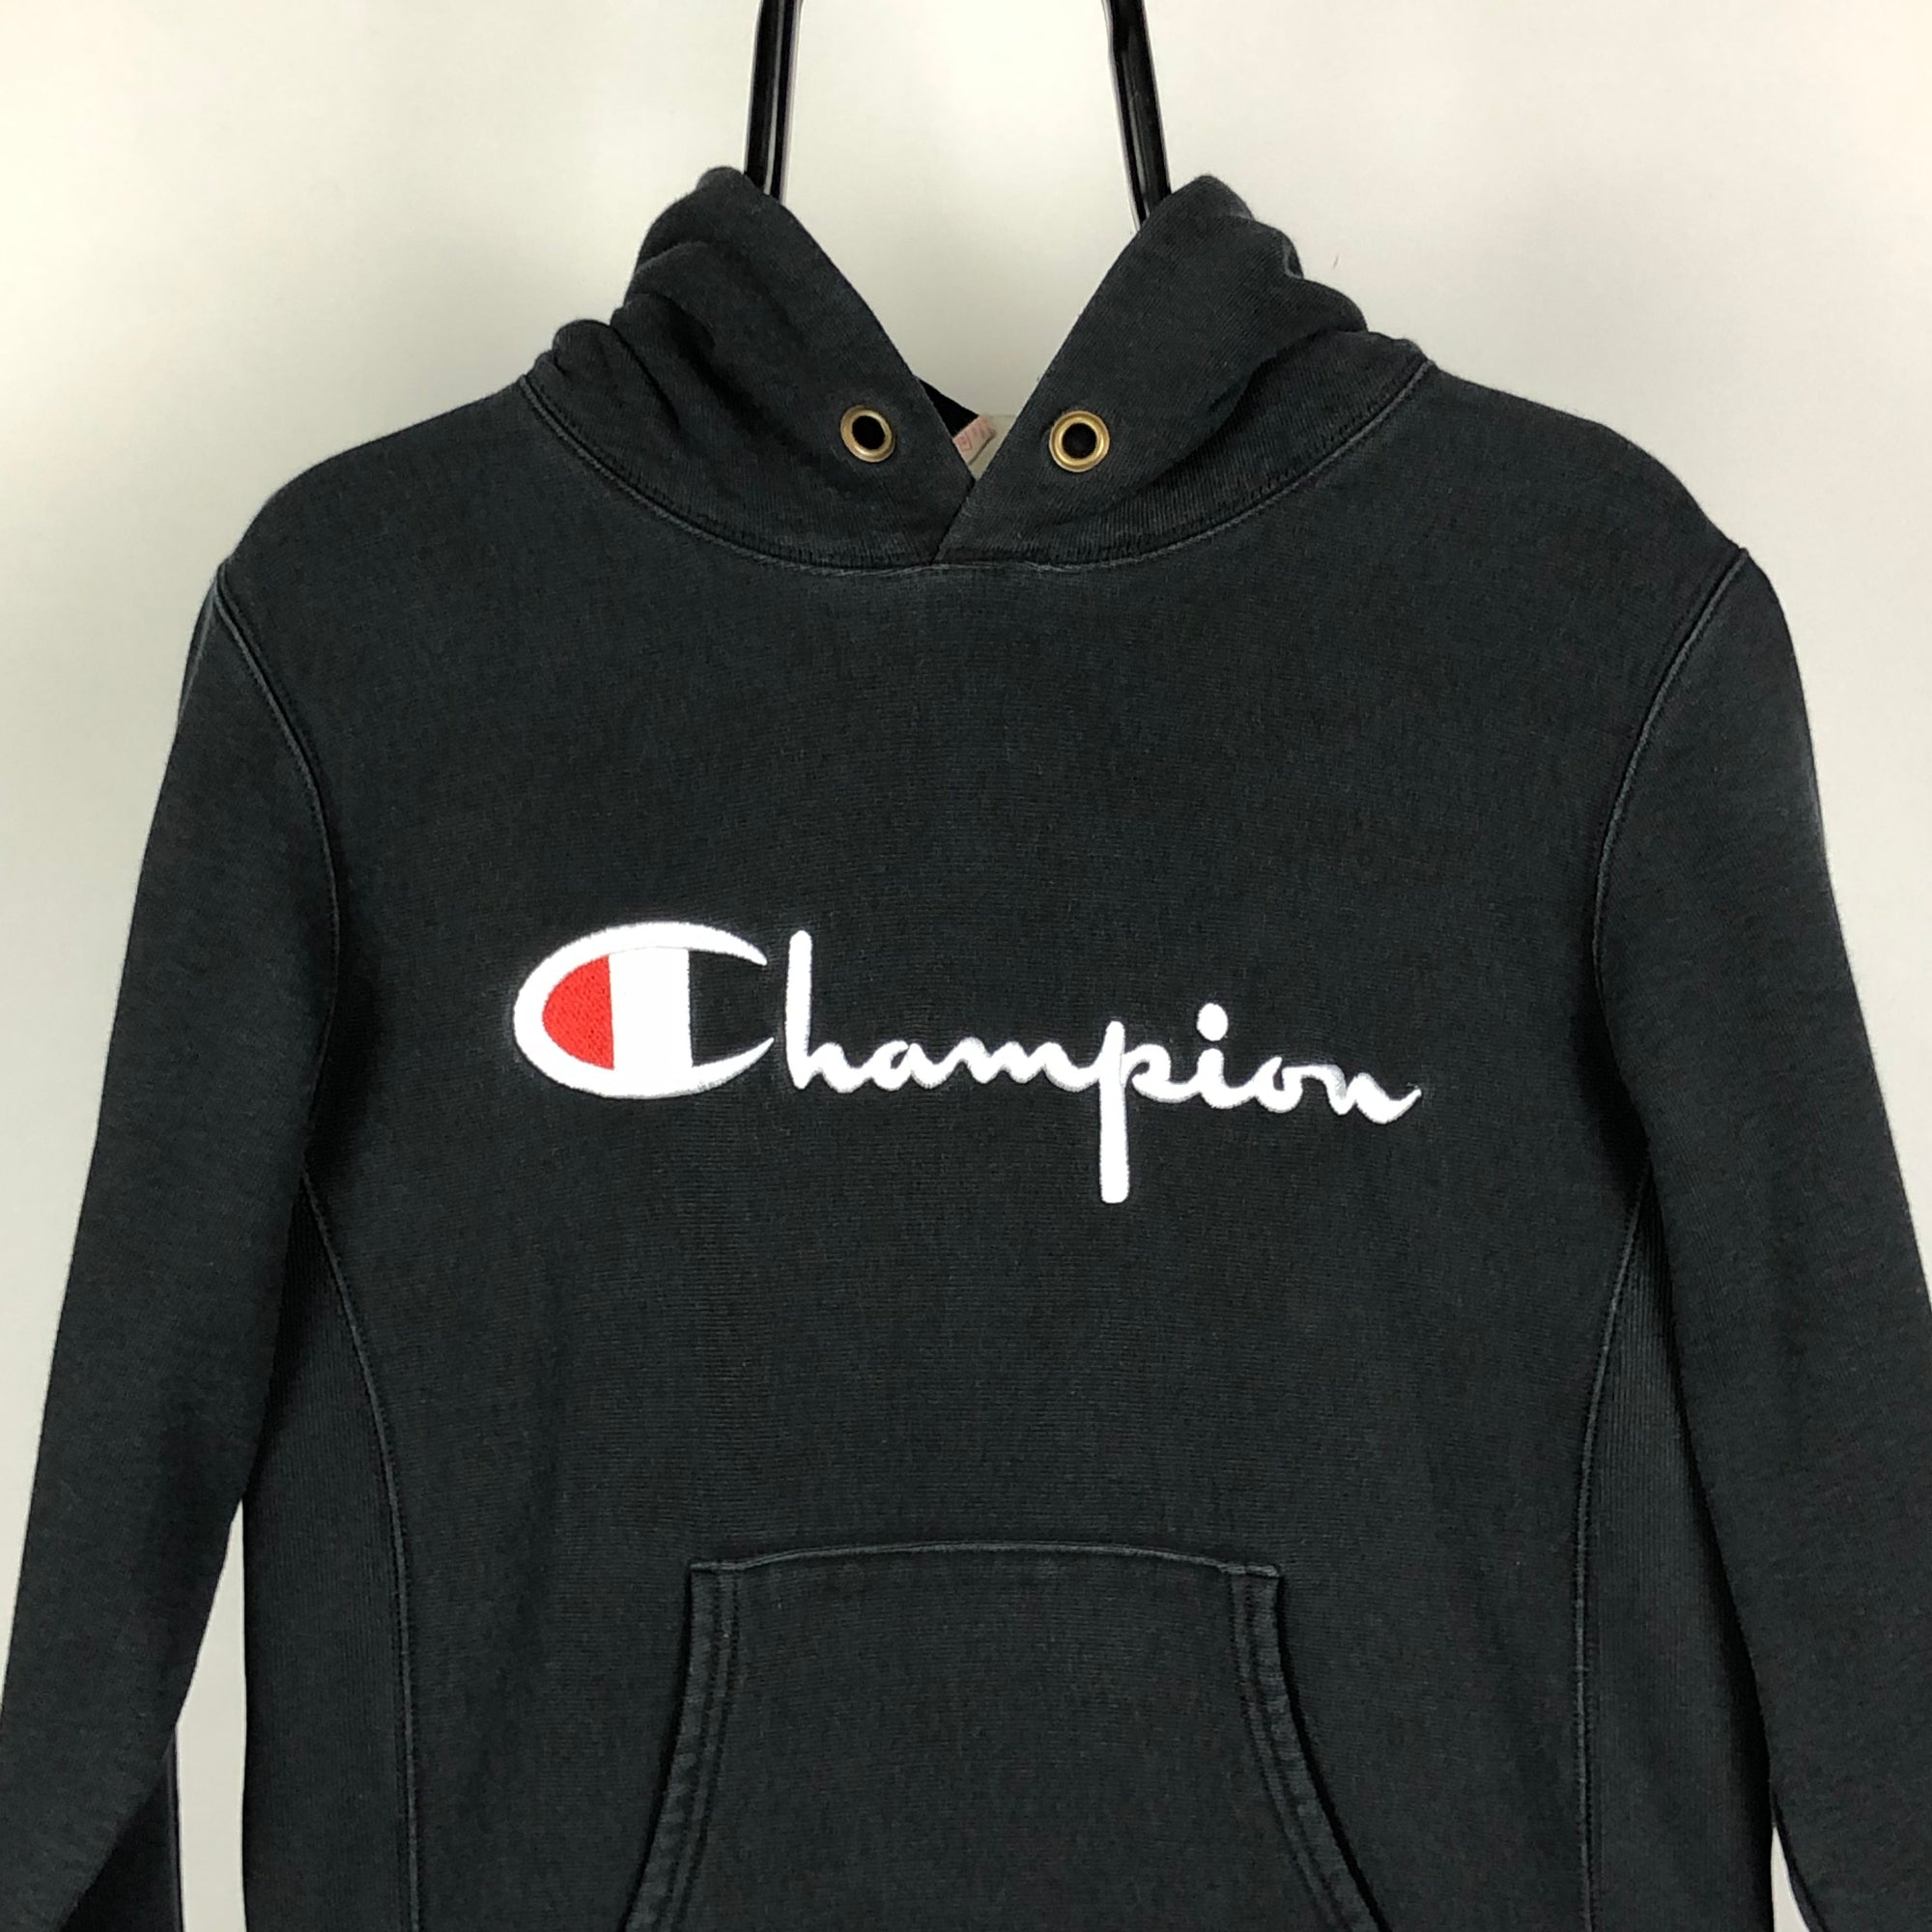 Champion Reverse Weave Embroidered Spellout Hoody in Black - Men's XS/Women's Small